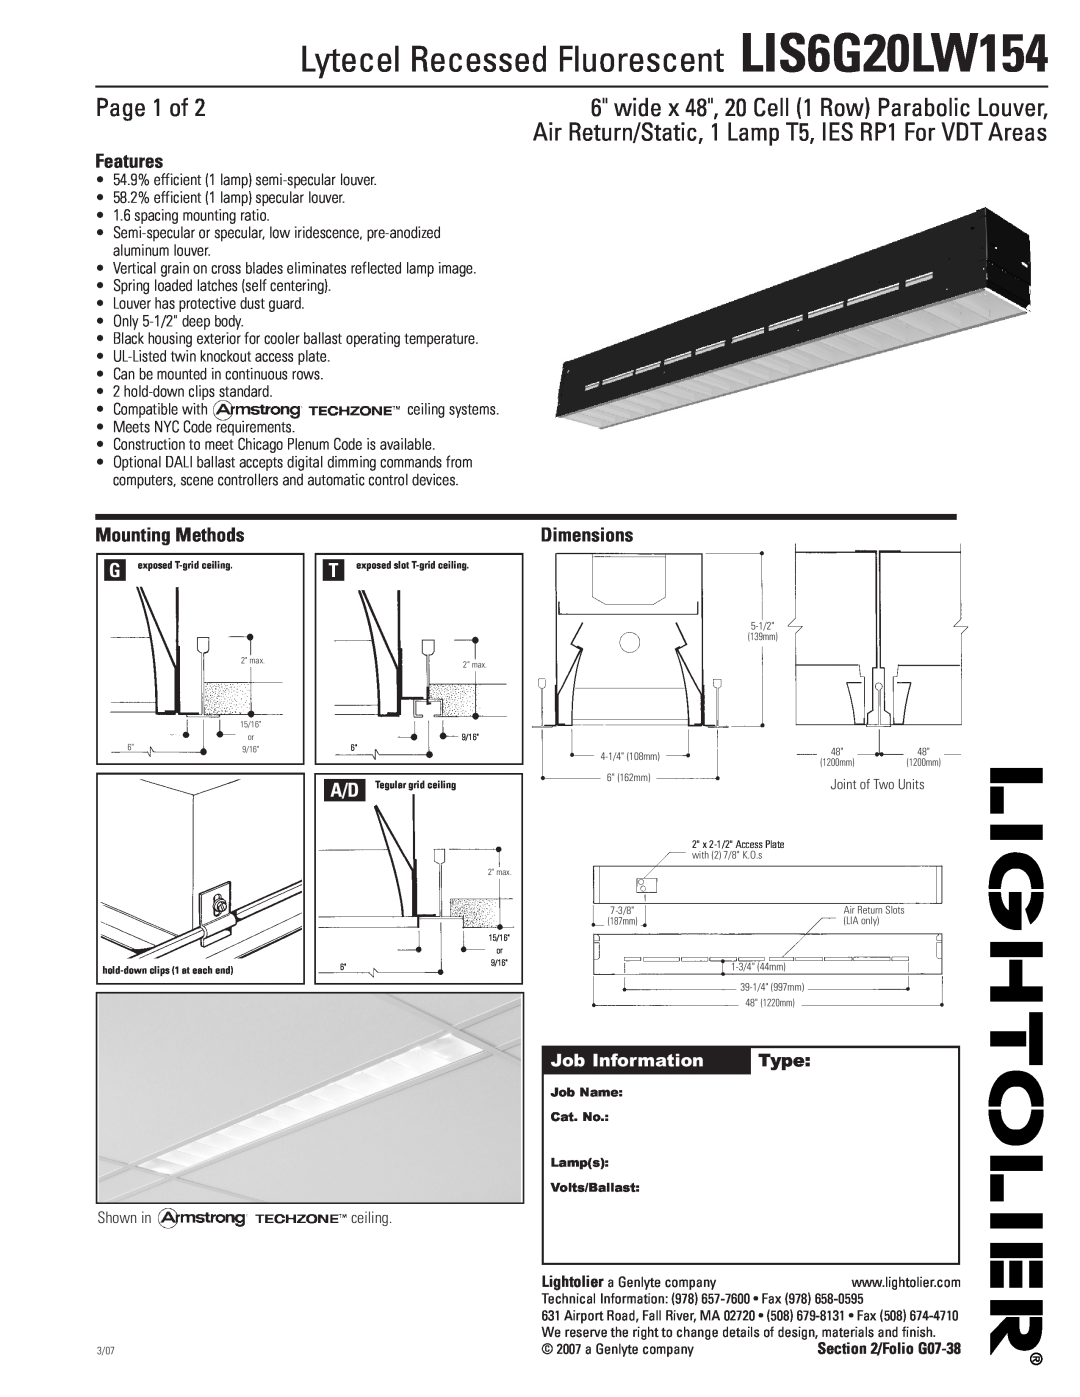 Lightolier dimensions Lytecel Recessed Fluorescent LIS6G20LW154, Page 1 of, Features, Mounting Methods, Dimensions 